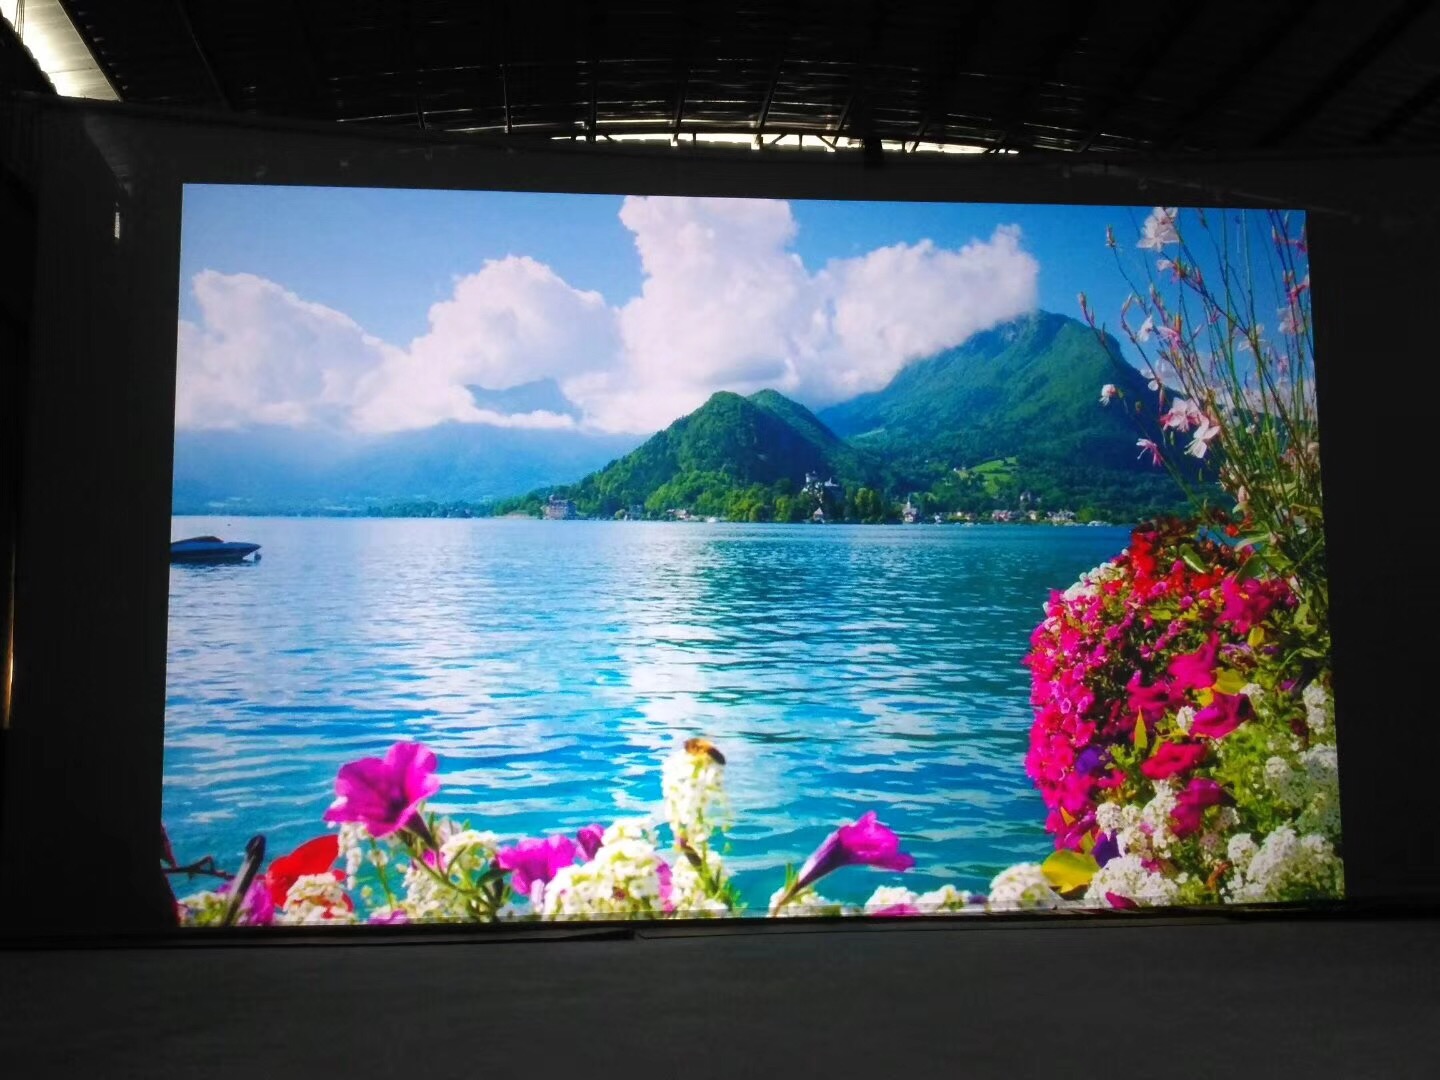 Best Motorized projection screen 2019 with competitive price